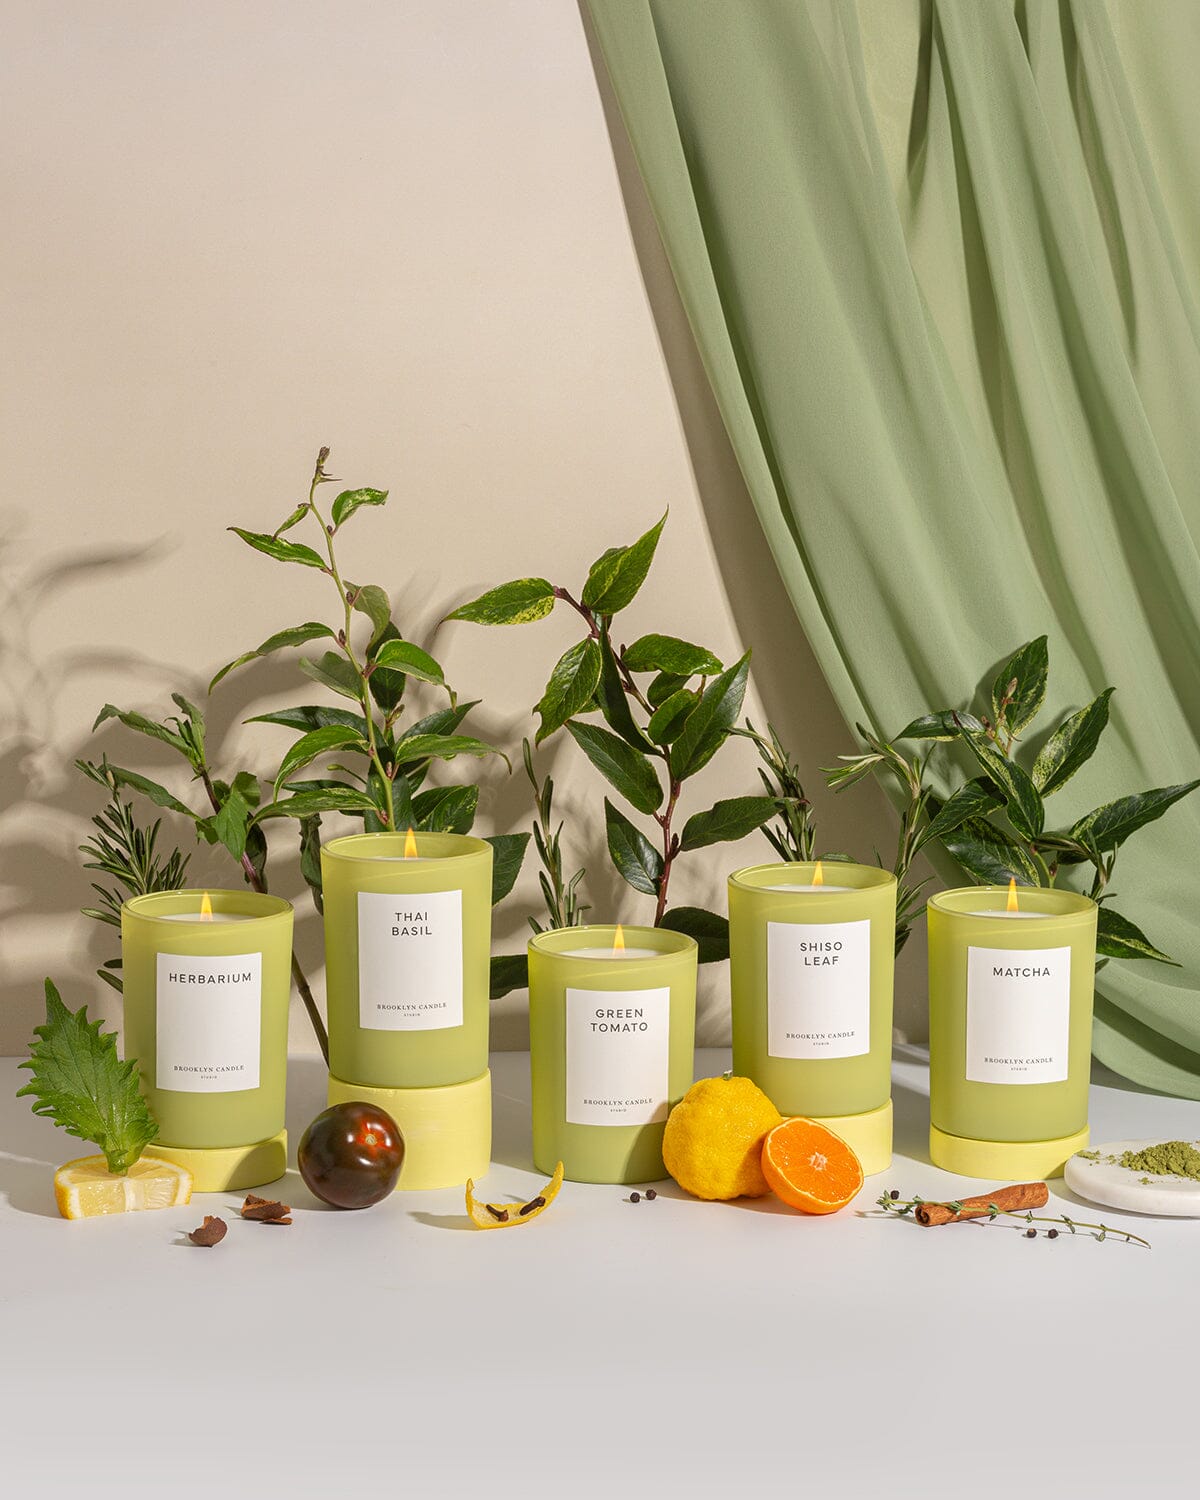 Thai Basil Limited Edition Candle Herbarium Collection Brooklyn Candle Studio 